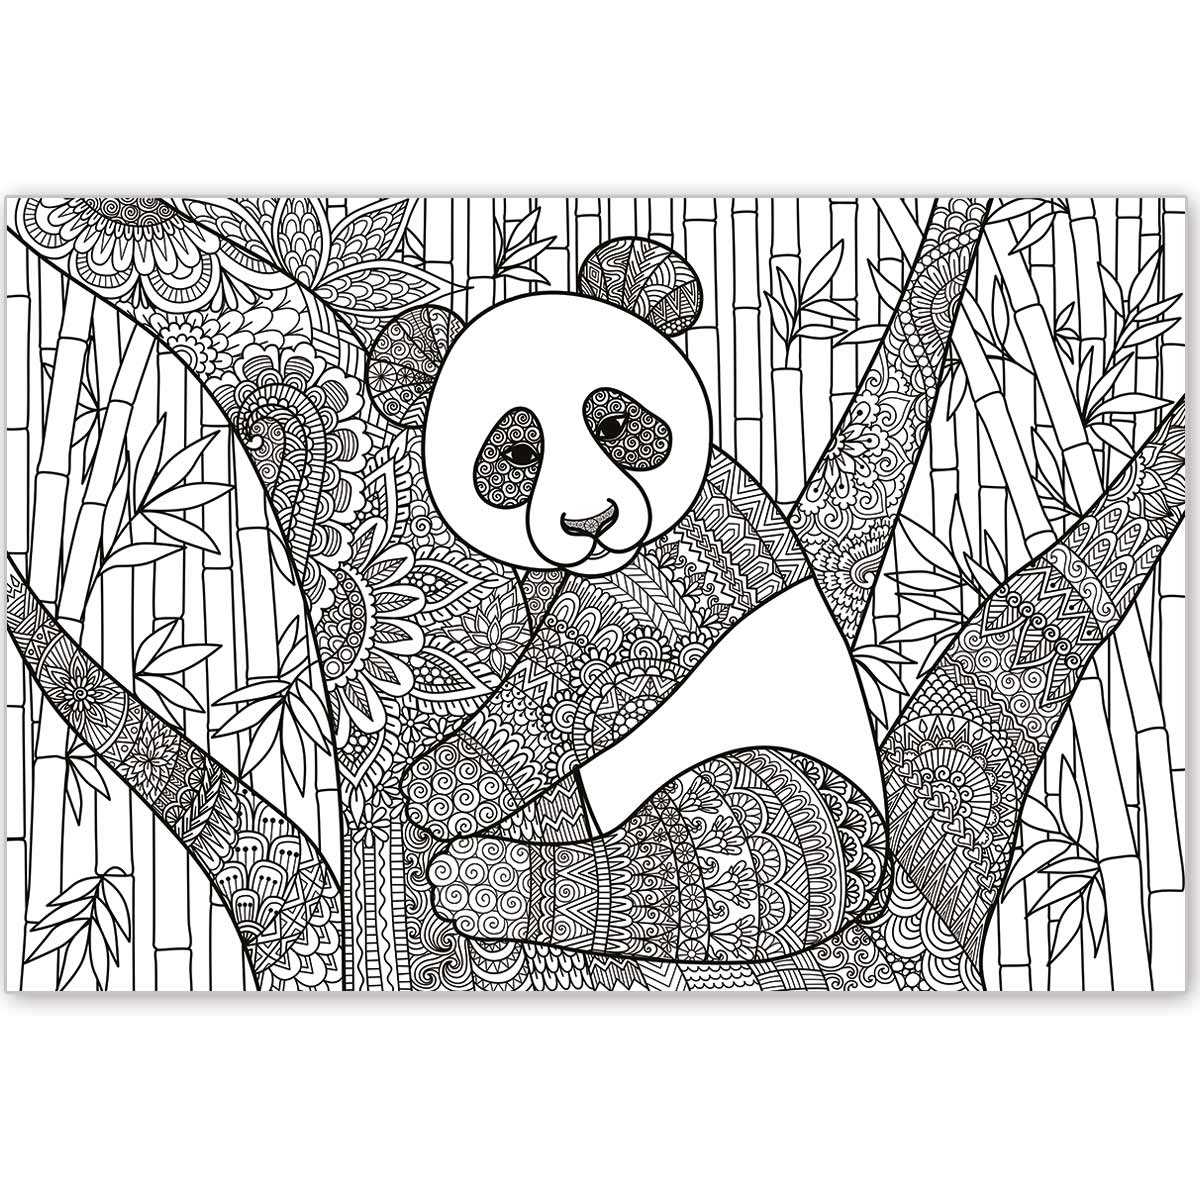 panda coloring pages